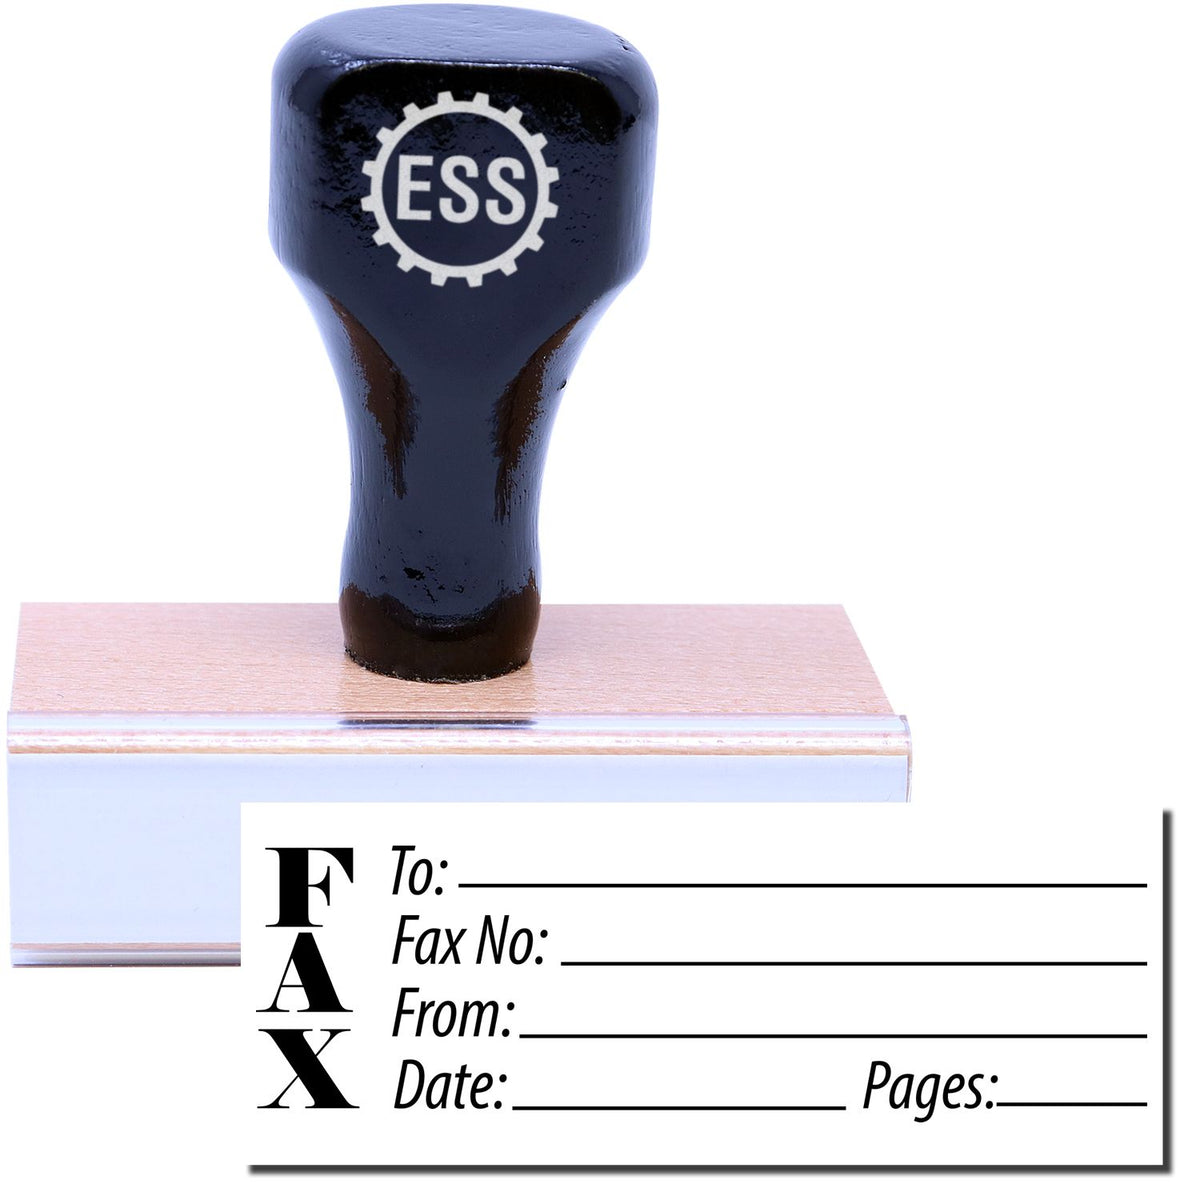 A stock office rubber stamp with a stamped image showing how the text &quot;FAX&quot; in bold font with fields for filling all the crucial details like recipient&#39;s name, fax number, sender&#39;s identity, date of faxing, and total number of pages is displayed after stamping.